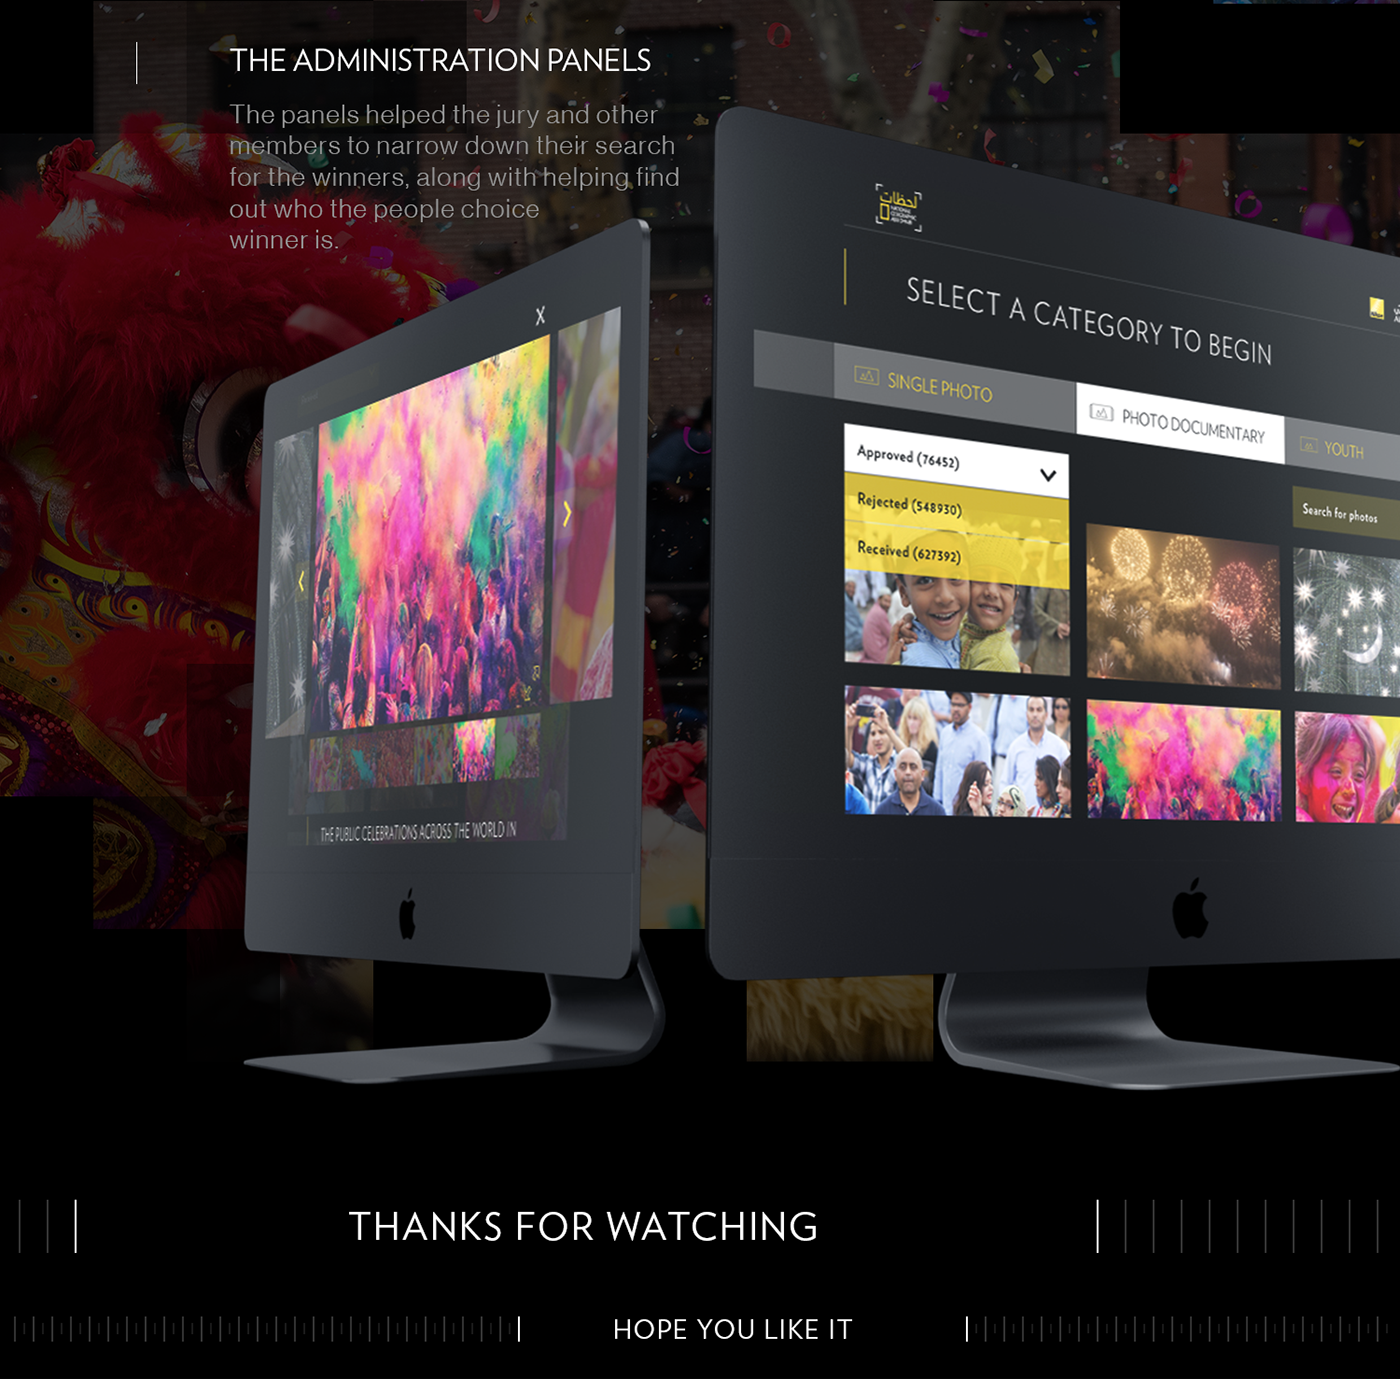 national geographic moments Photography  Competition Website user experience admin pane